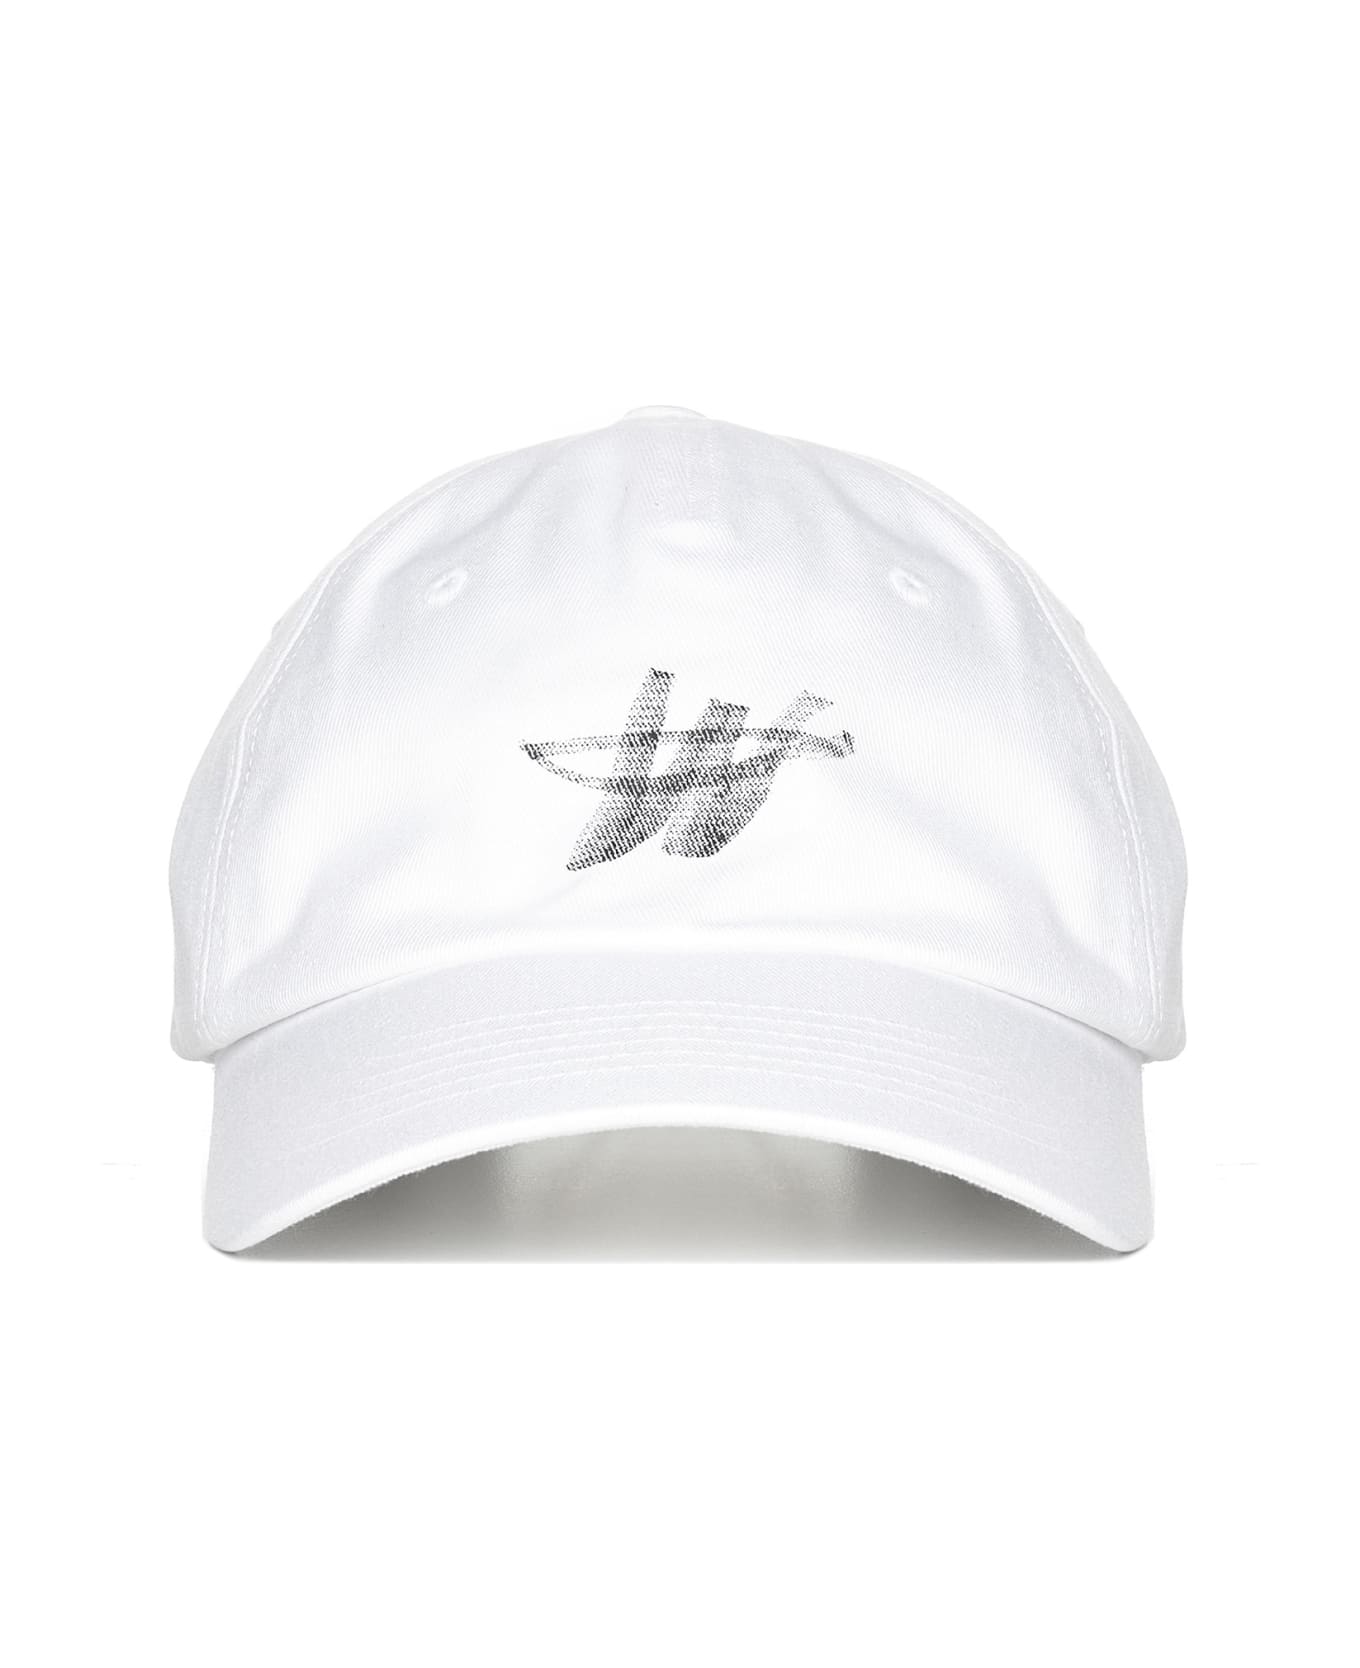 WE11 DONE Hat - White